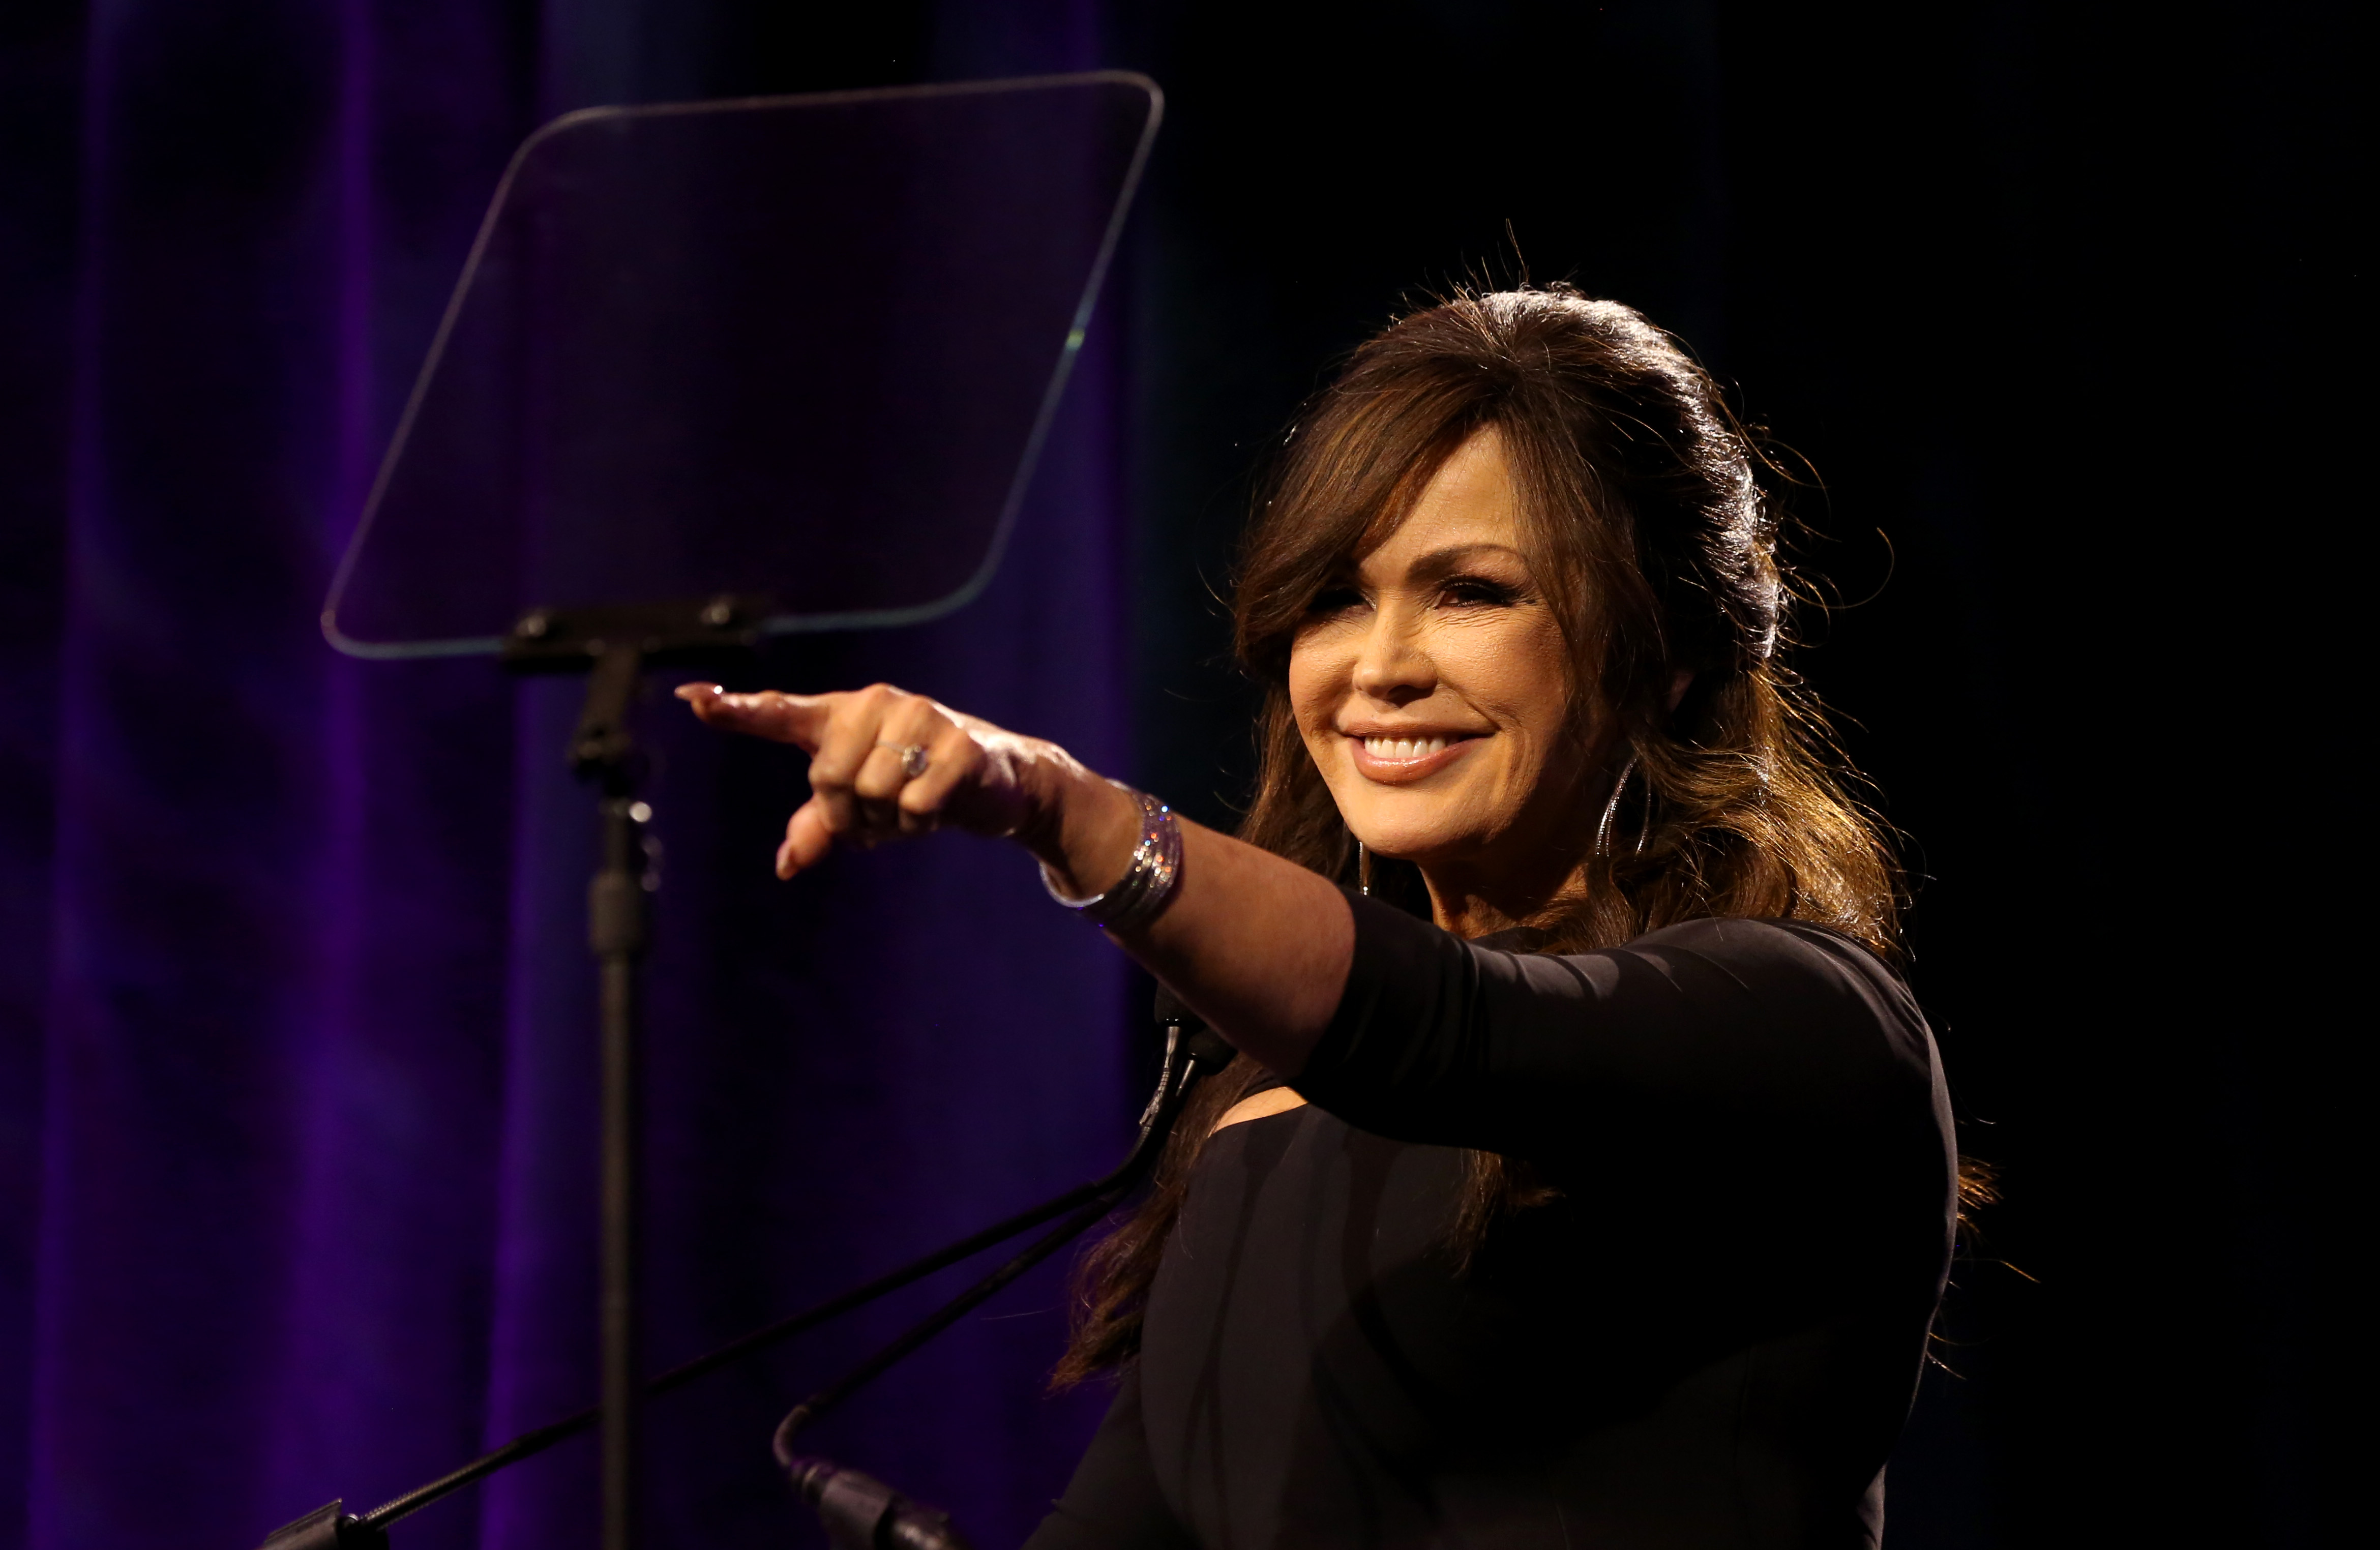 Singer Marie Osmond speaks during the 36th Annual Black and White Ball event at Caesars Palace on January 25, 2020 in Las Vegas, Nevada | Source: Getty Images